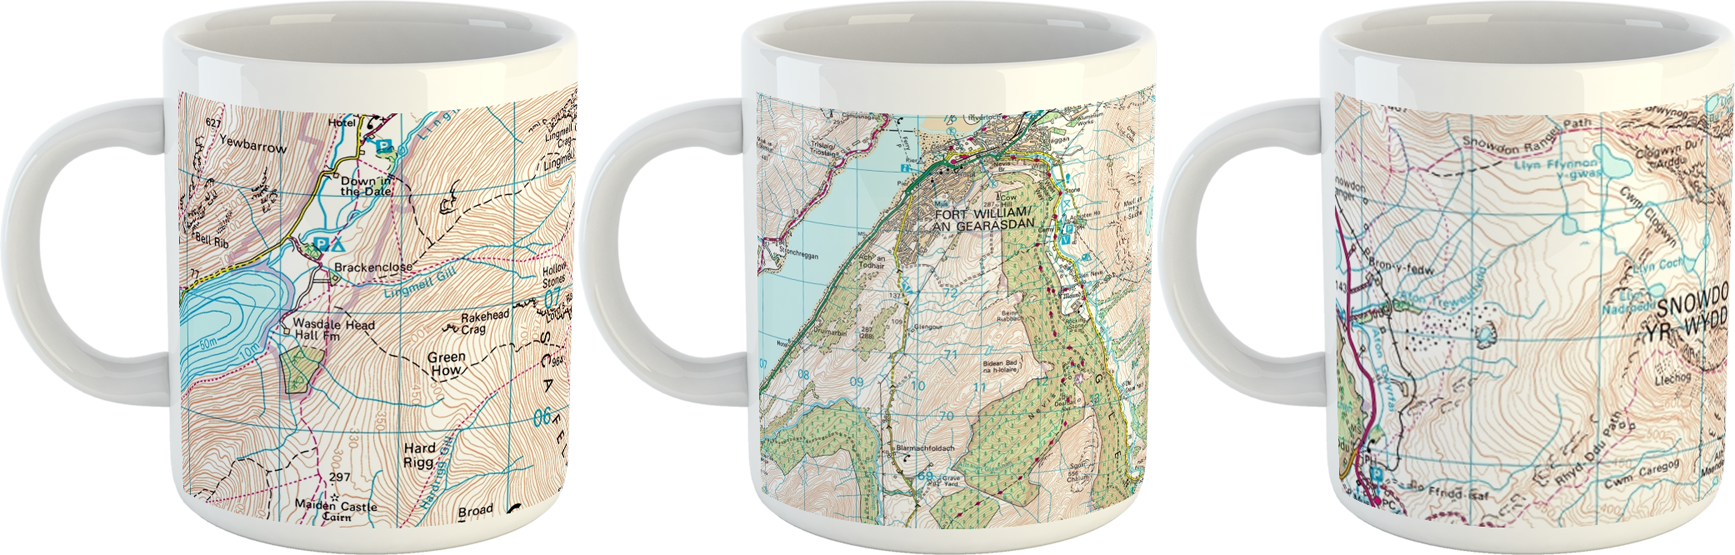 This set of the three national peaks are perfect for anyone in the national peaks or the National Three Peaks Challenge covering Ben Nevis, Scafell Pike and Snowdonia.  The image is highly detailed showing contours, lakes, paths, symbols and more.